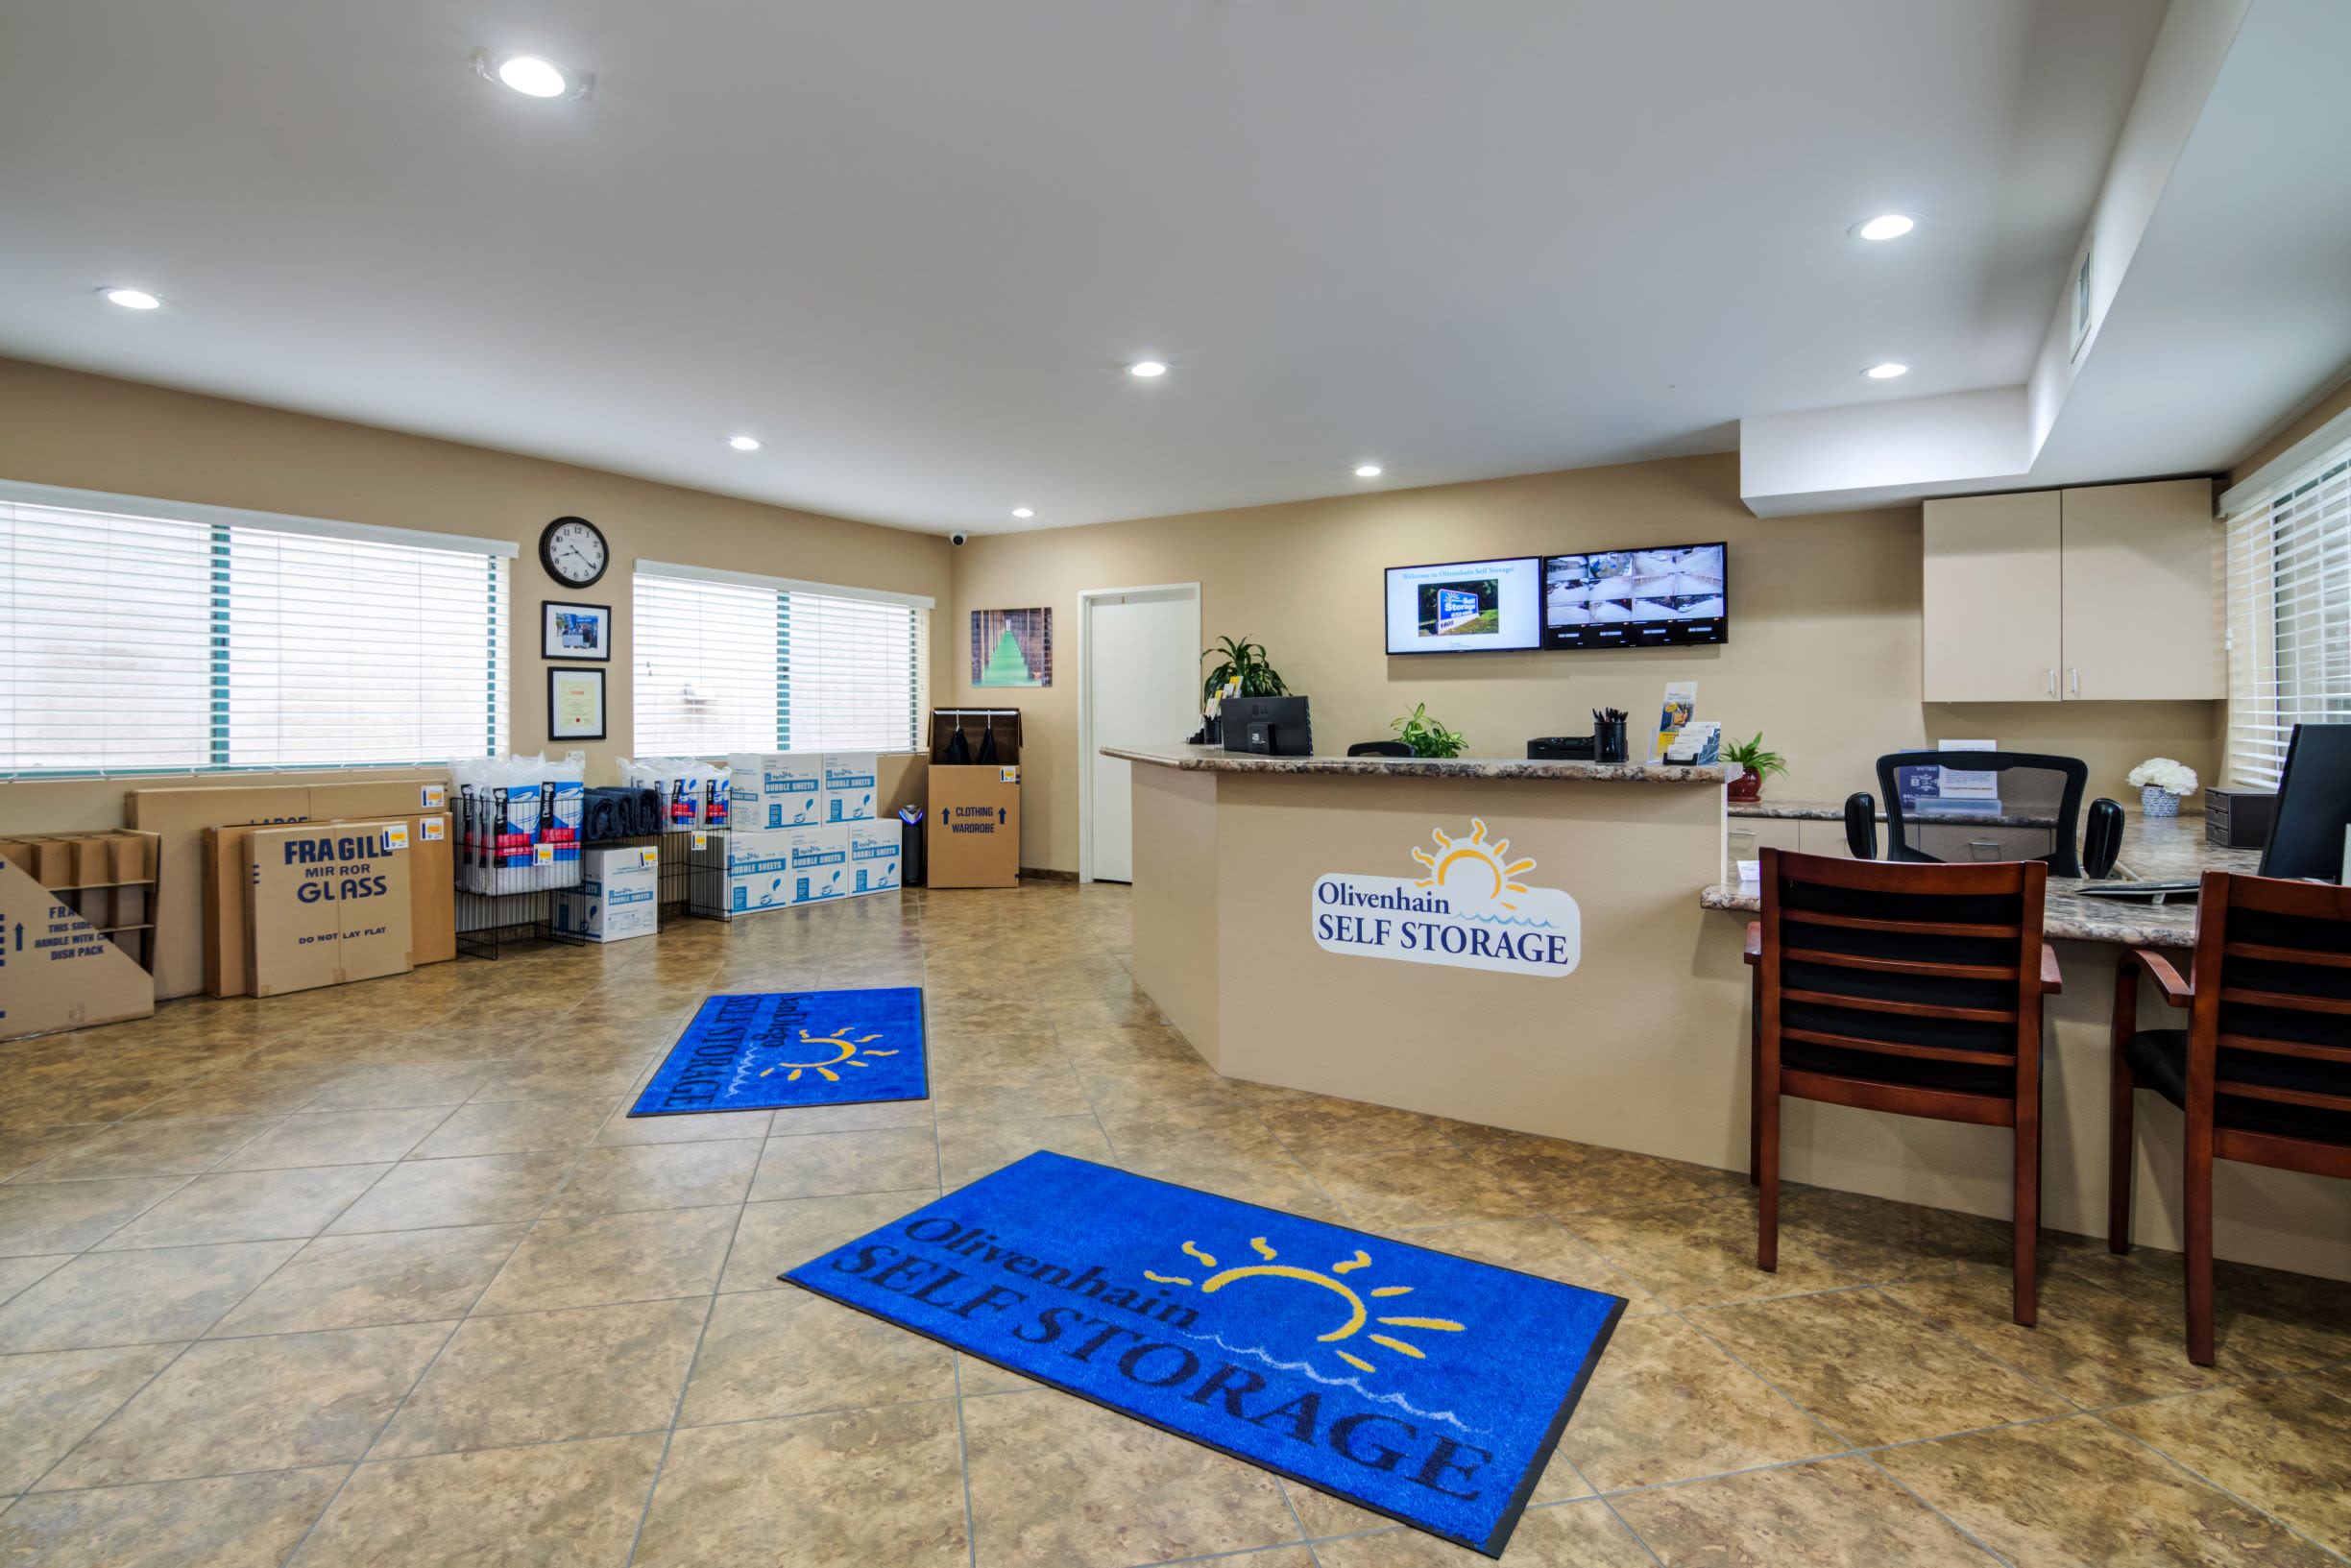 The interior front office Olivenhain Self Storage in Encinitas, CA